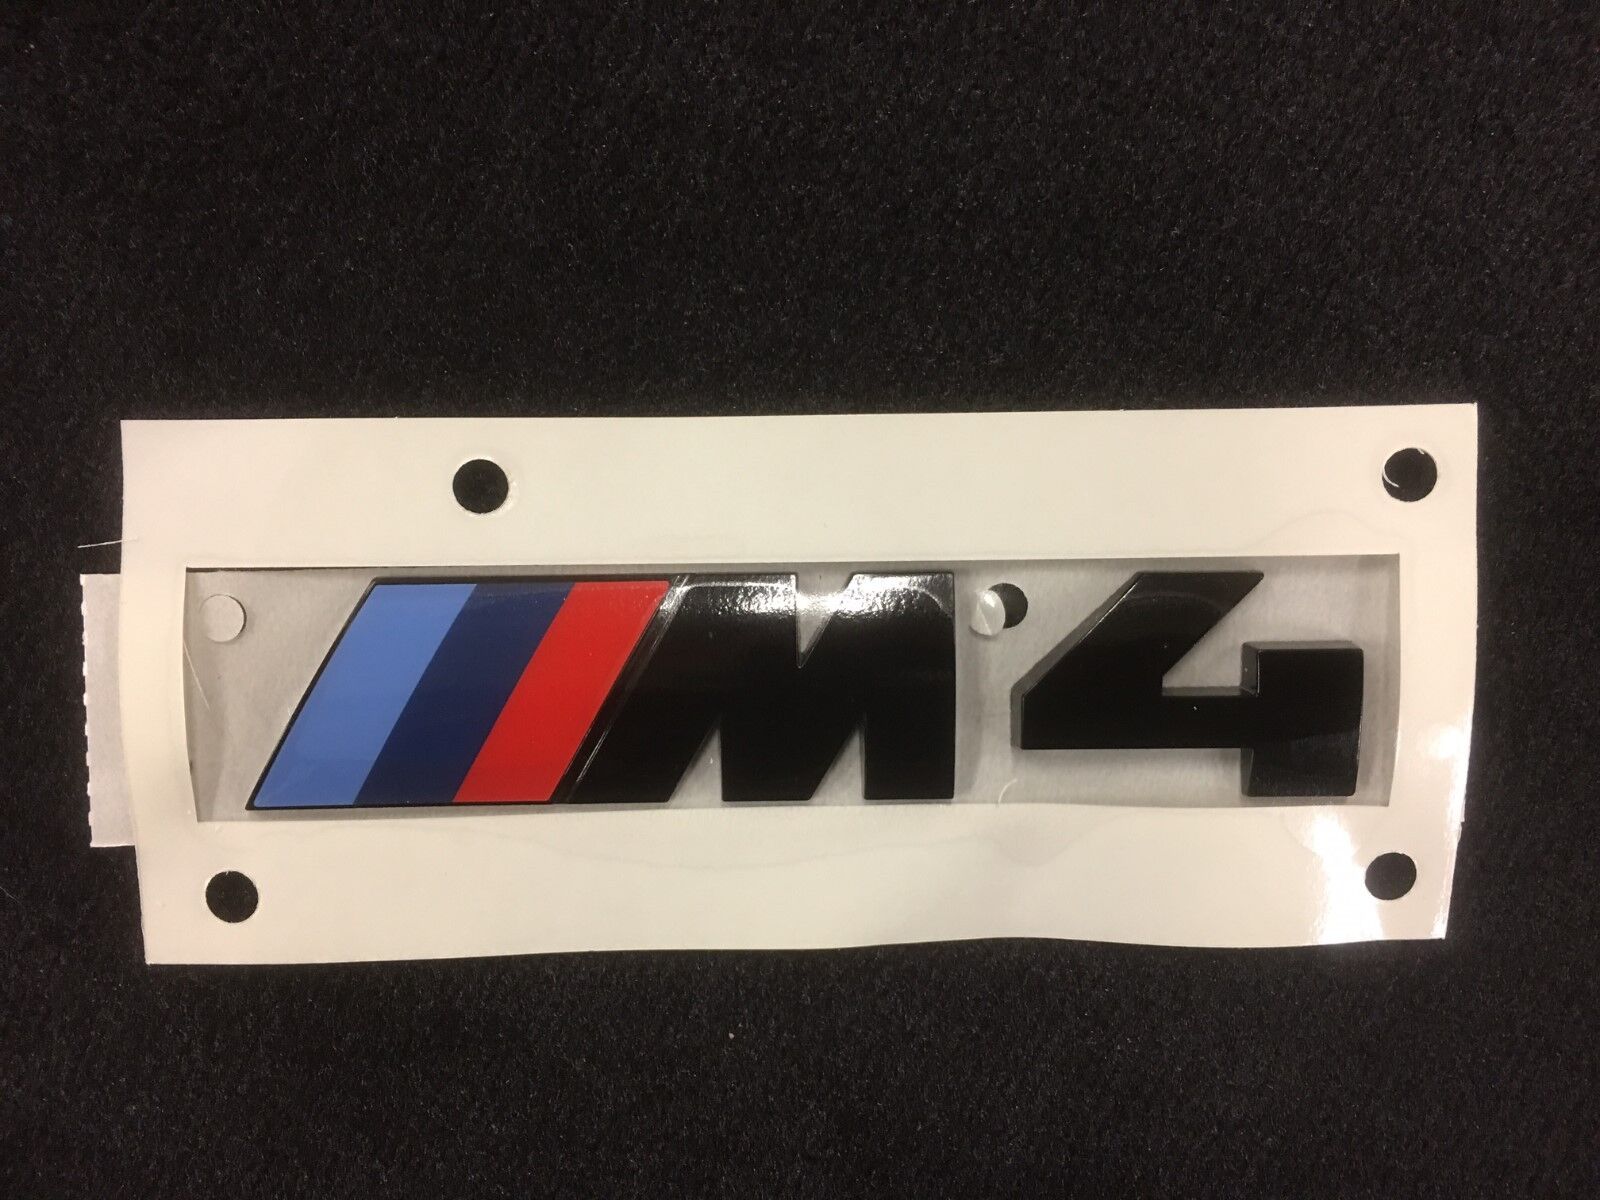 BMW M4 Rear Emblem in Black Authentic OEM 51148068579 Competition Package Logo